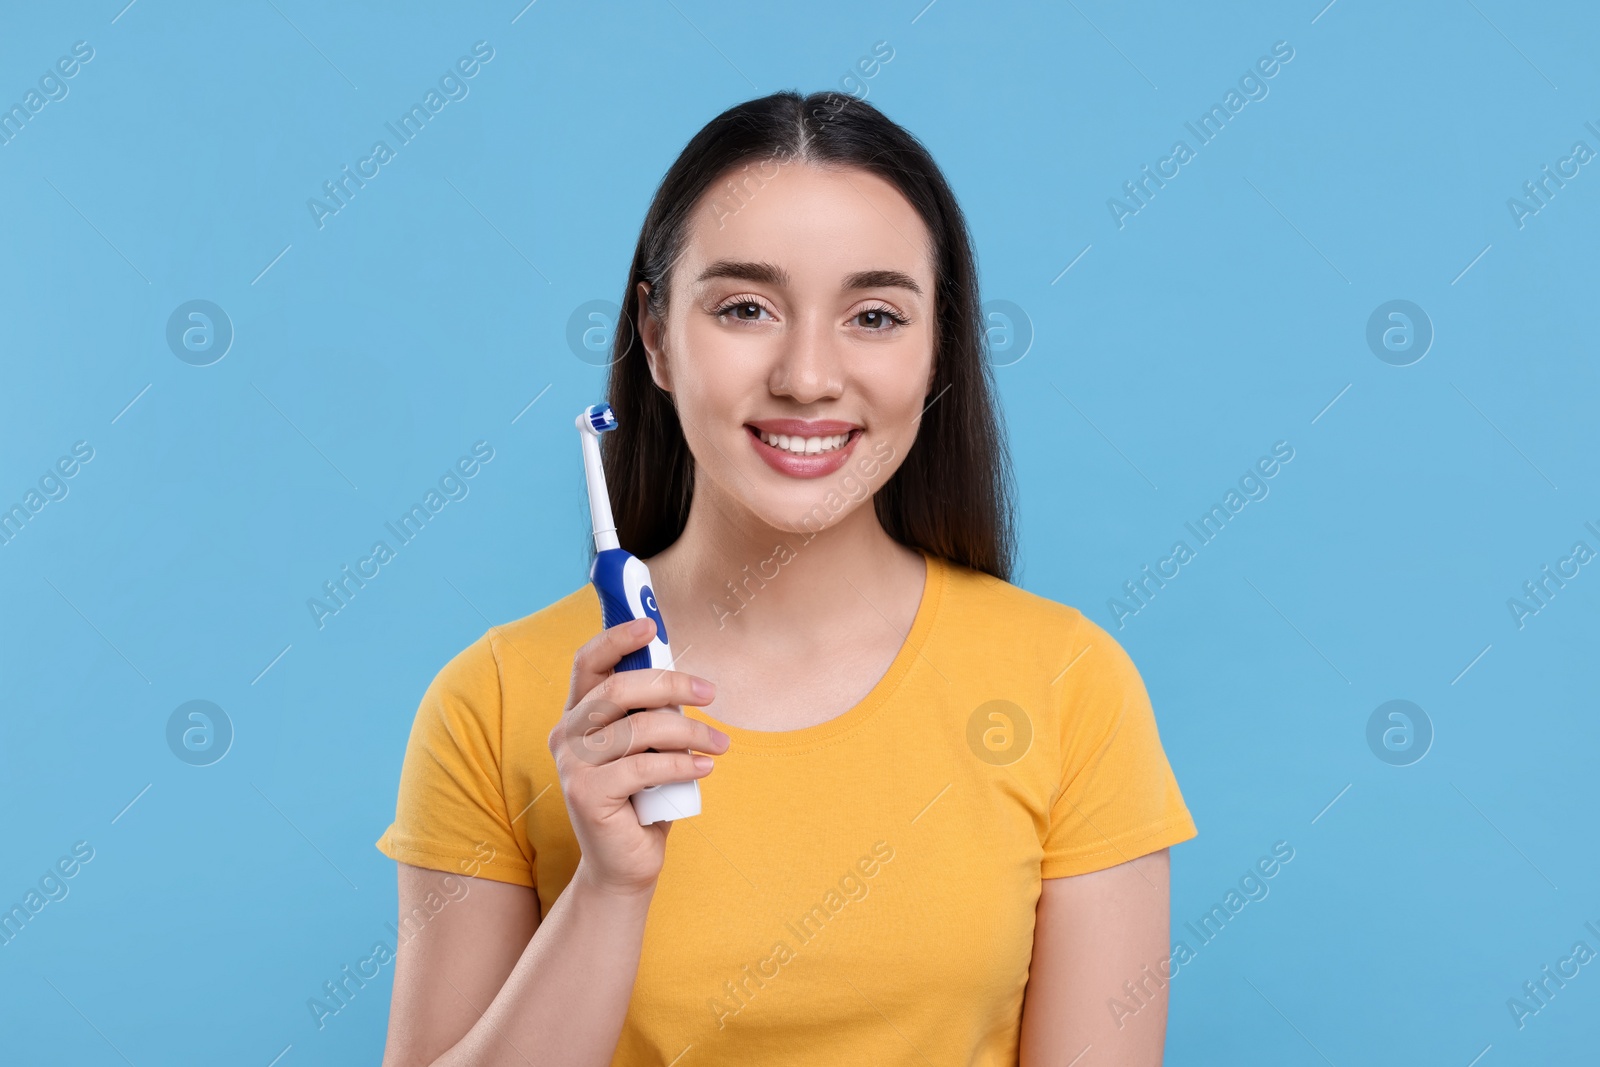 Photo of Happy young woman holding electric toothbrush on light blue background